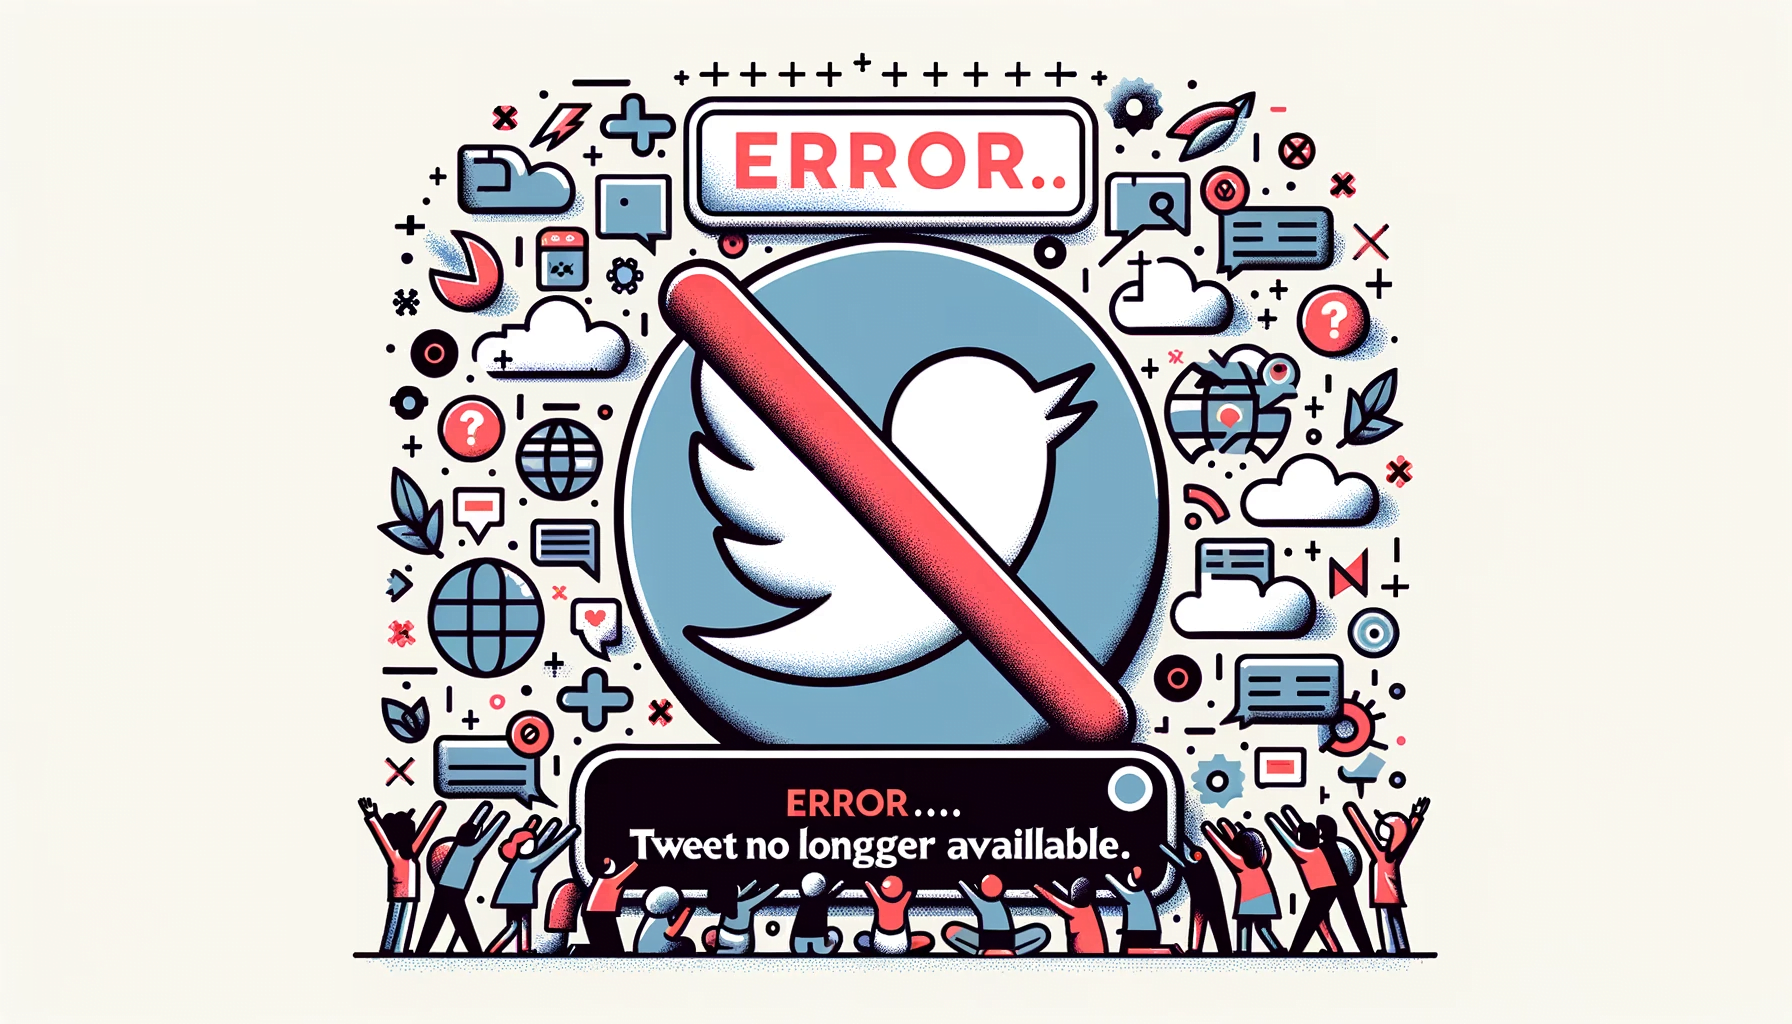 "This tweet is no longer available" – Twitter error Explained